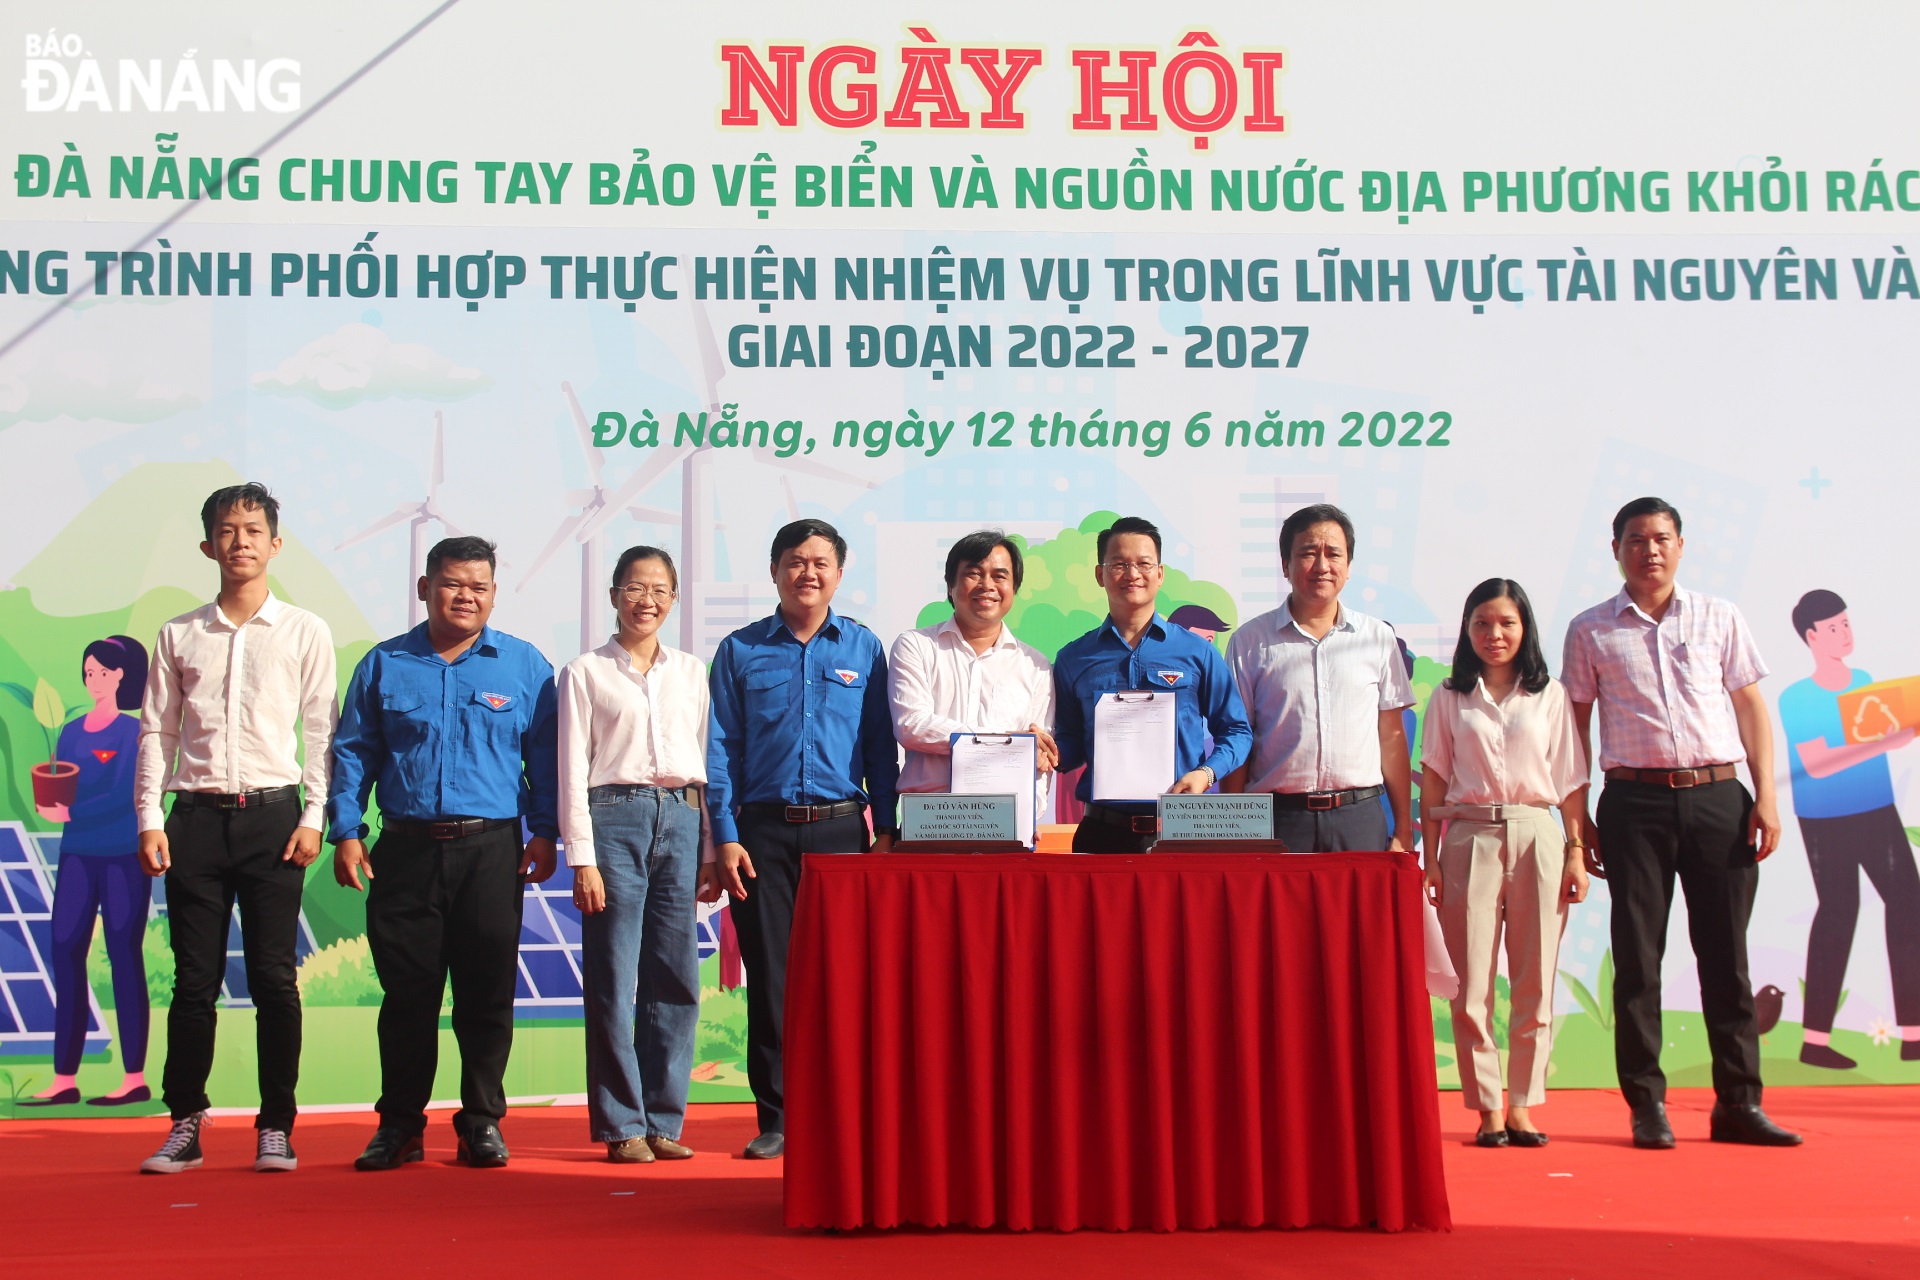 Leaders of the Da Nang Department of Natural Resources and Environment and the municipal Youth Union signed a cooperation programme on performing tasks in the field of natural resources and environment during the 2022 - 2027 period. Photo: NGOC QUOC